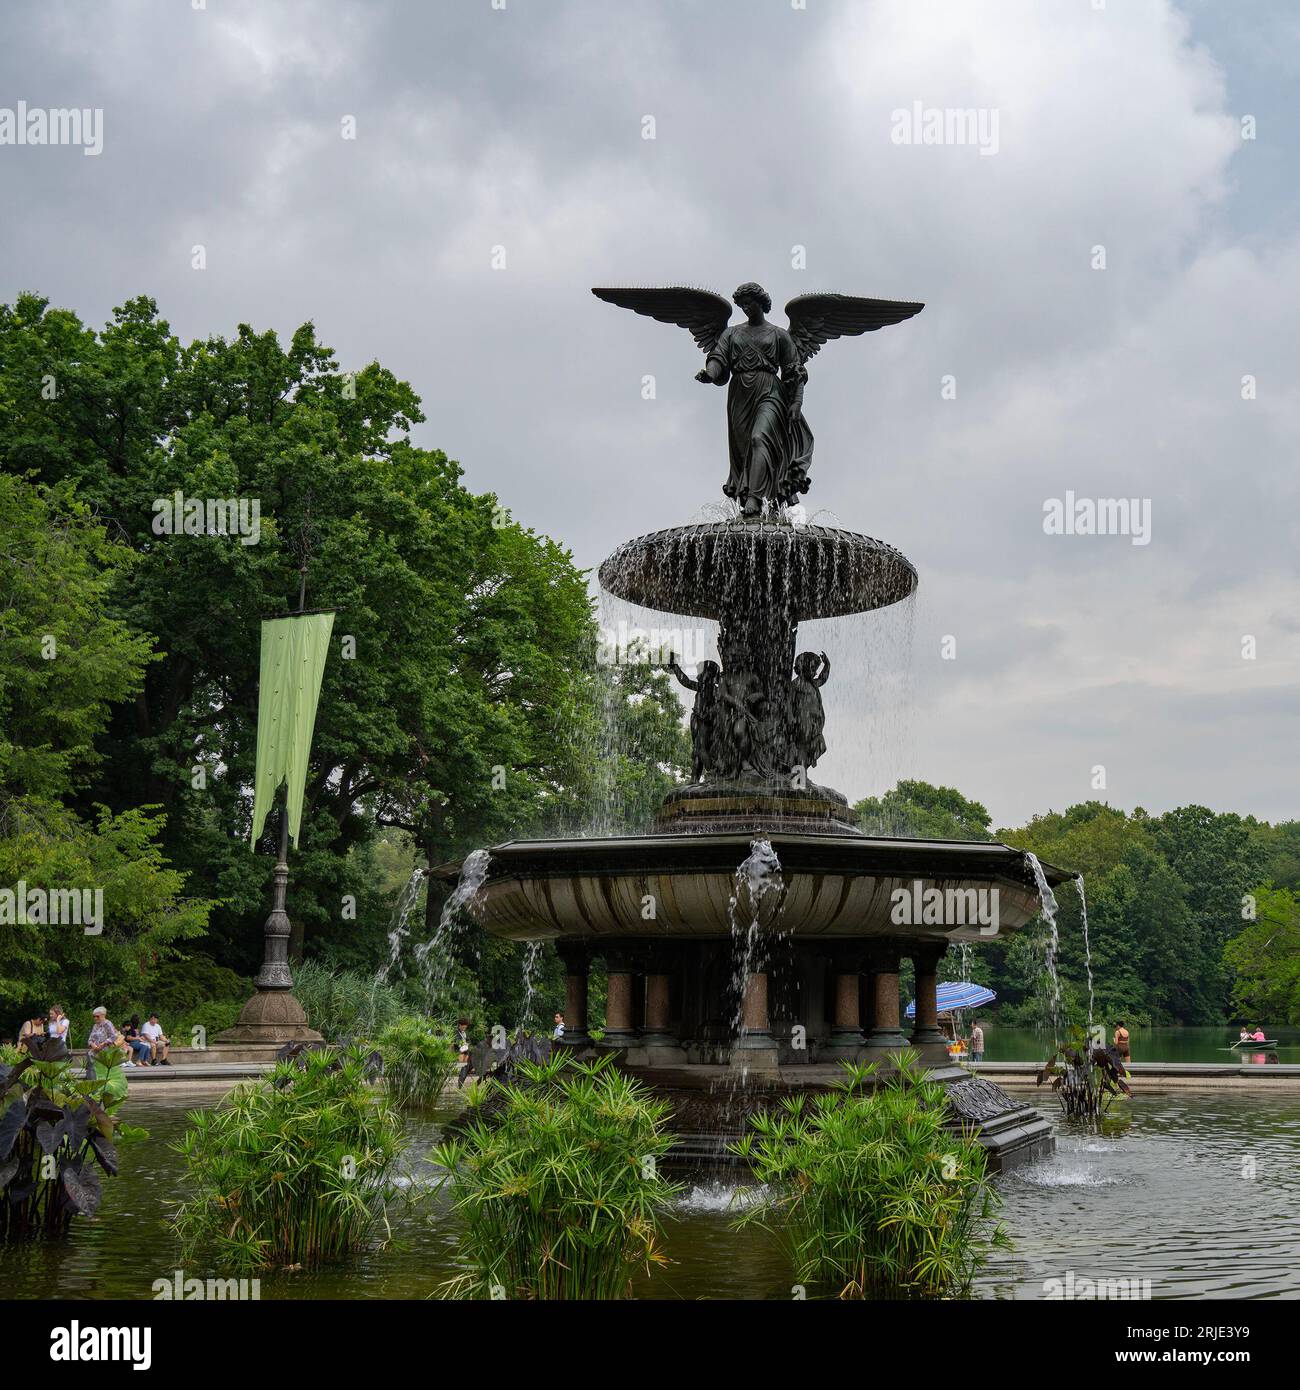 USA New York Bethesda Fountain Central Park Old Stereoview Photo